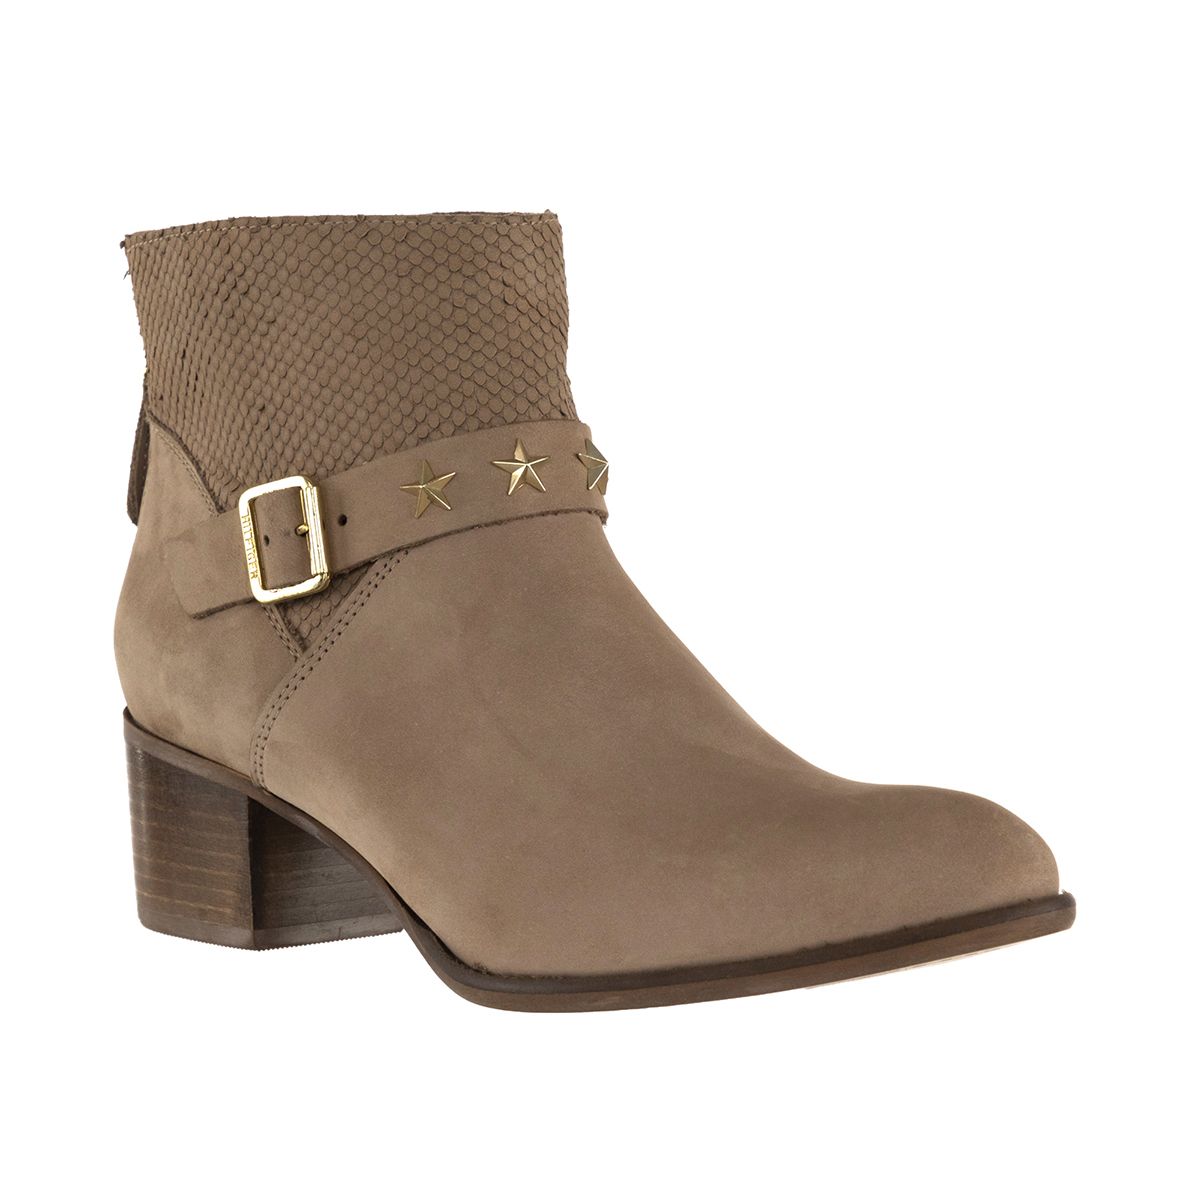 Tommy Hilfiger FW0FW01156-053-41 Why not experiment with different looks with these beige ankle boots? Pair them with a leather jacket for a rock-chick look or with a fringed jacket for a boho-folksy look...The possibilities are endless. Regular fit.